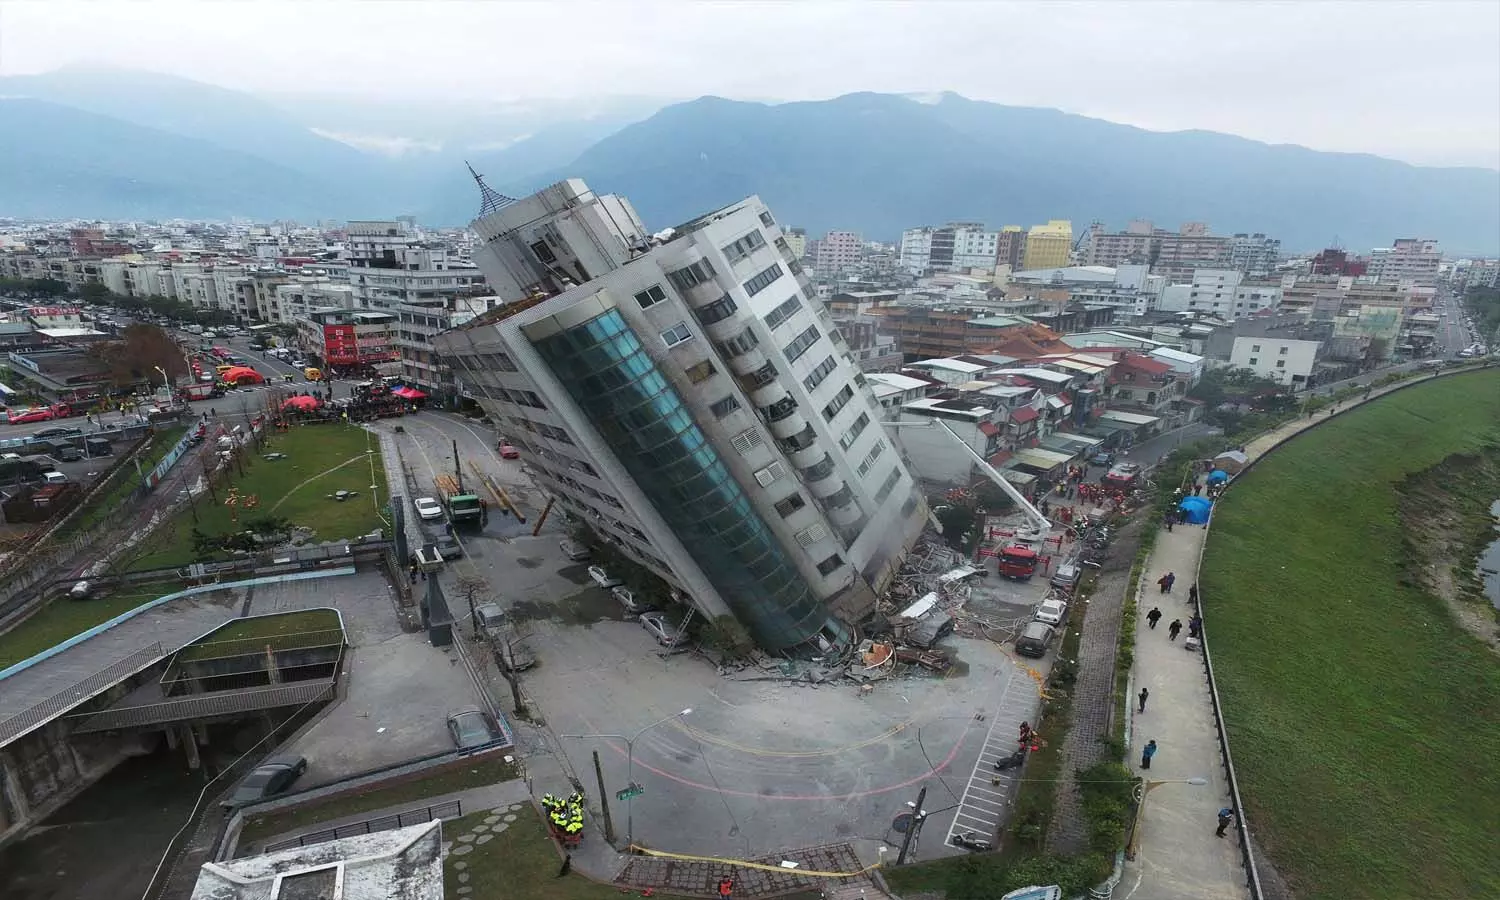 Strong earthquake shakes Taiwan, magnitude 6.6 on the Richter scale